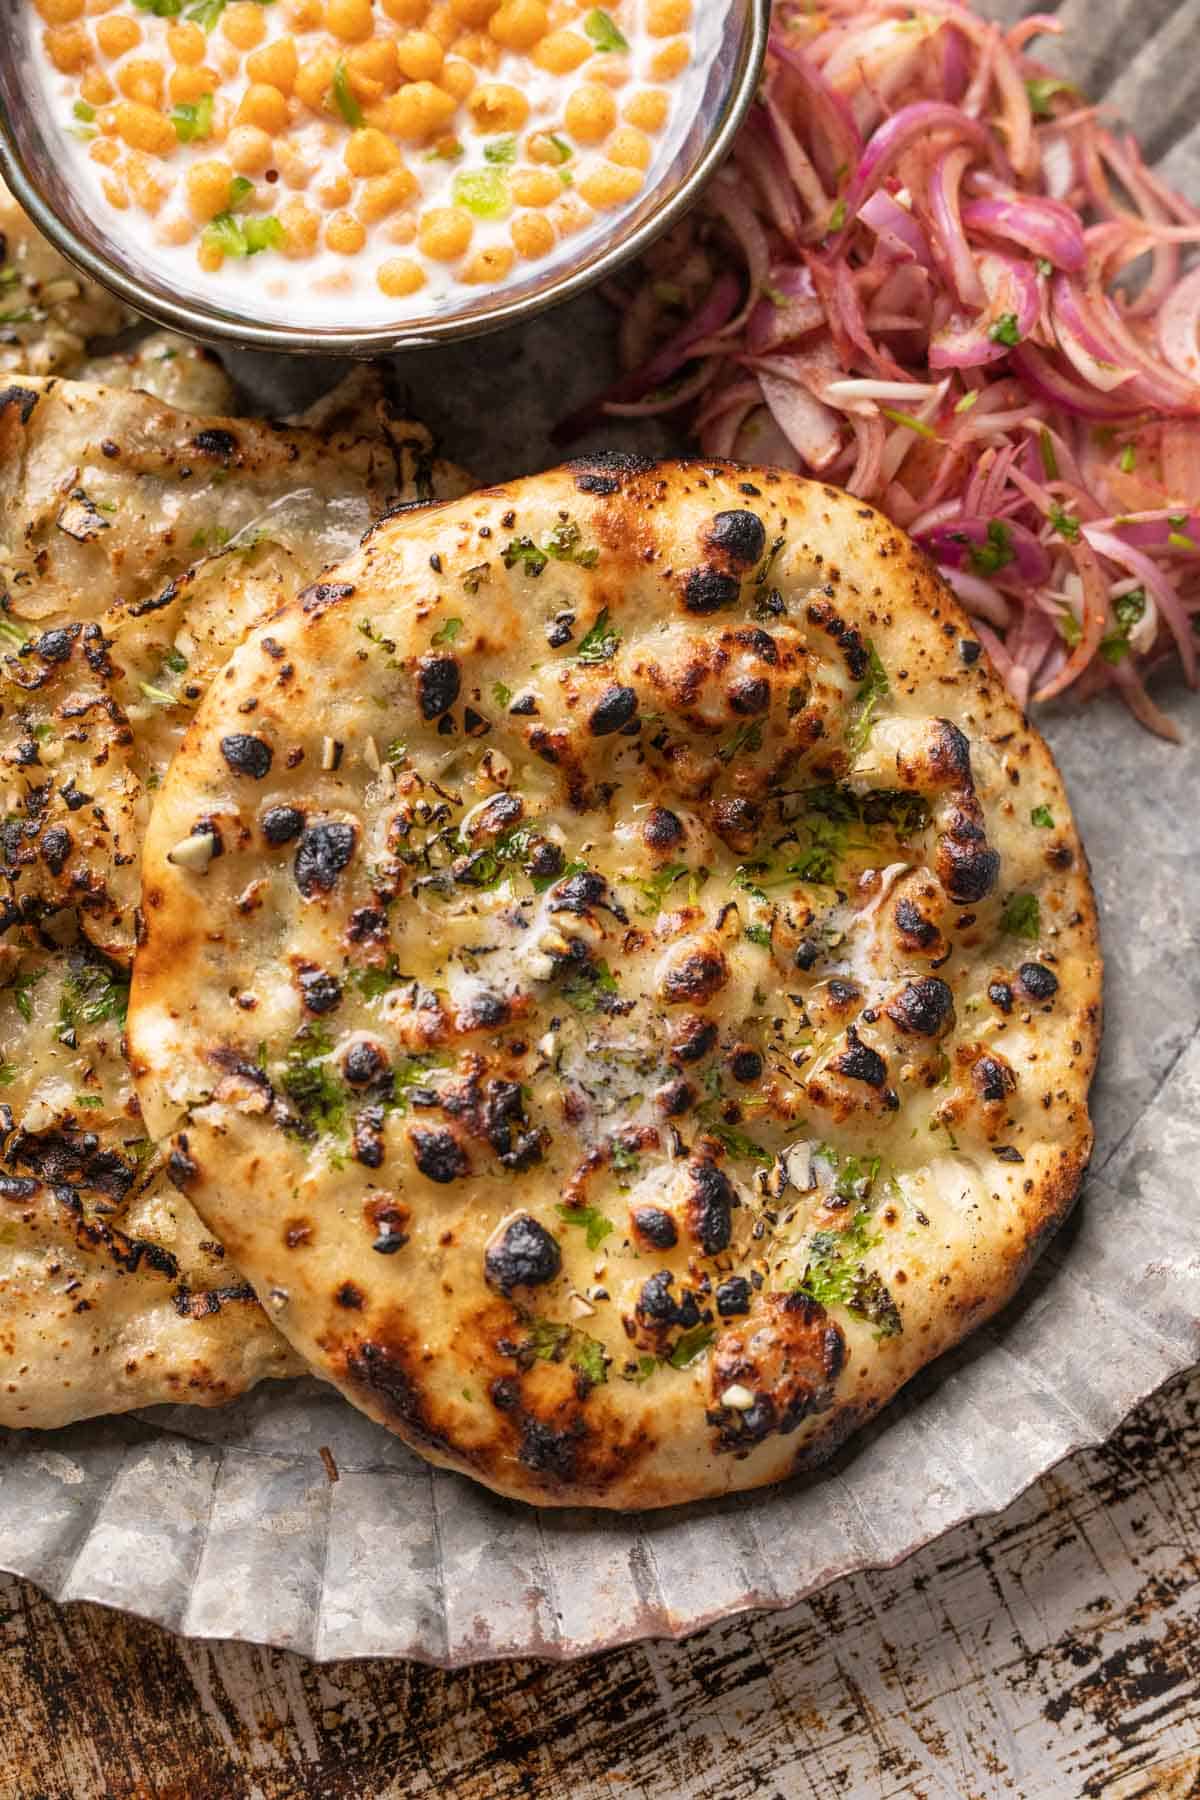 Garlic cheese kulcha served on a plate with pickled onions and boondi raita on the side